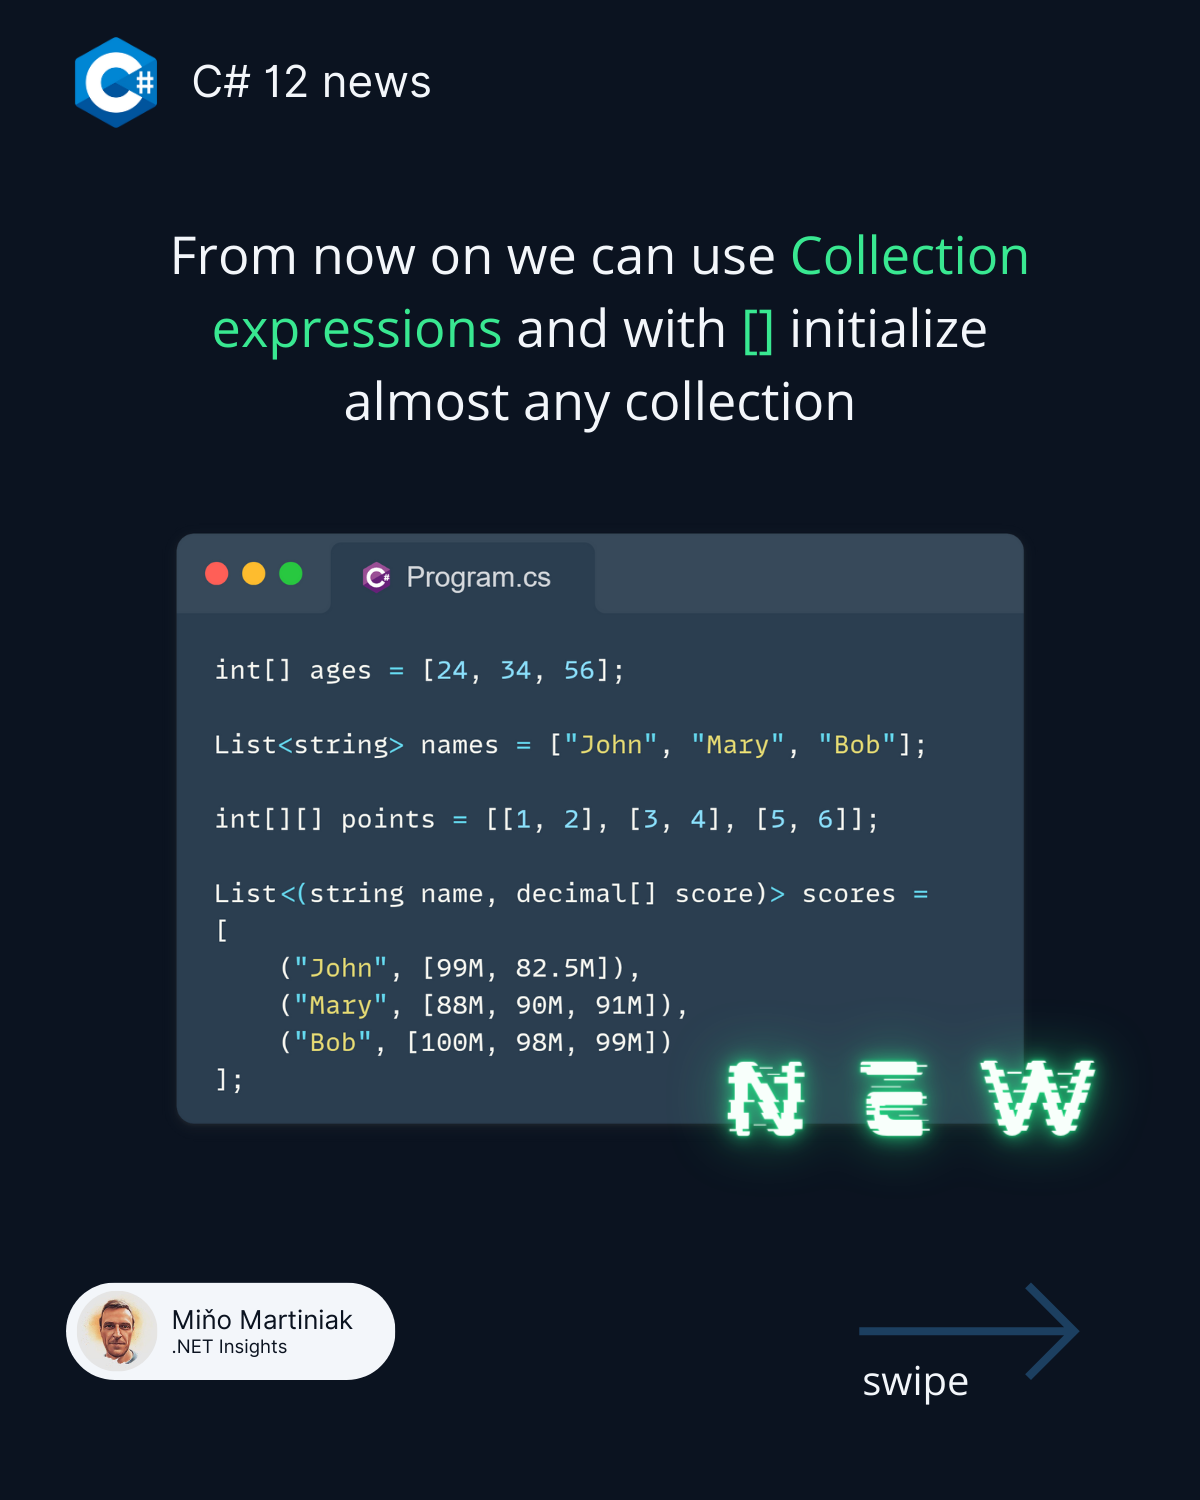 Collection expressions